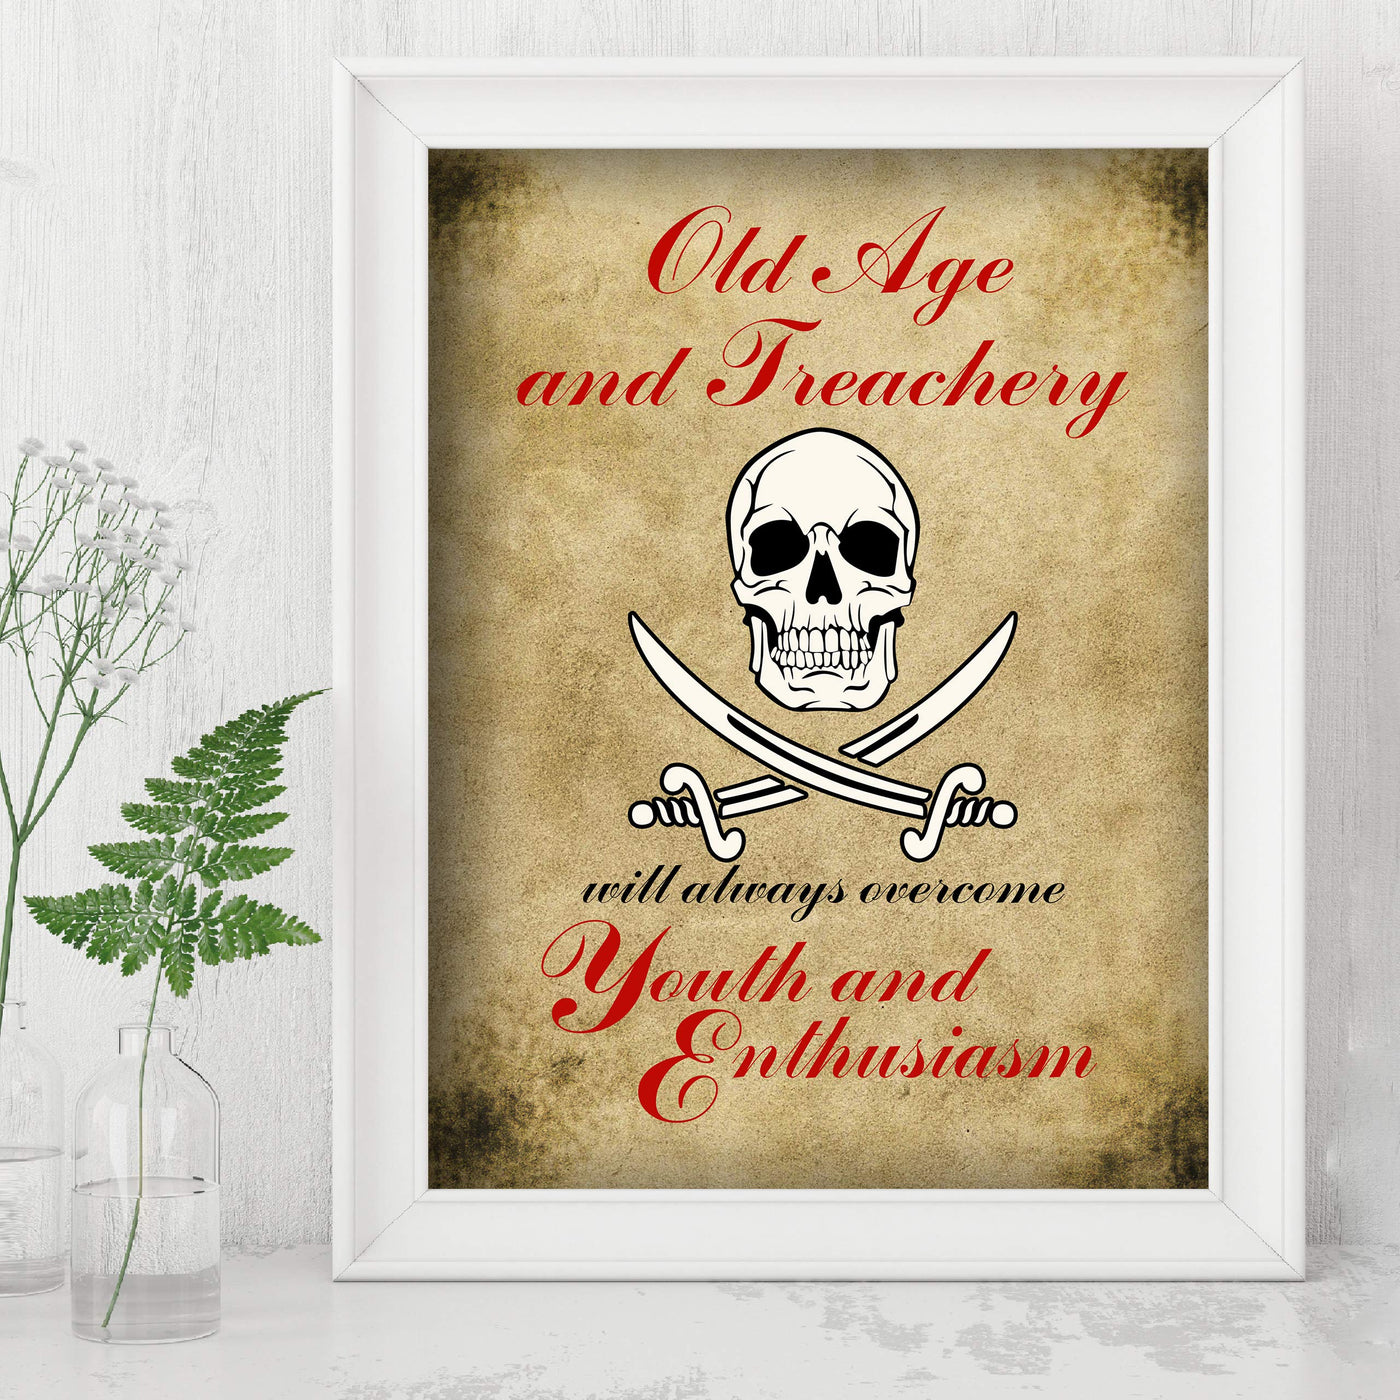 ?Old Age and Treachery?-Funny Pirate Wall Art -8 x 10" Replica Distressed Skull Print-Ready to Frame. Sarcastic Decor for Home-Office-Bar-Shop-Man Cave Decor. Fun Sign & Great Gift! Printed on Paper.